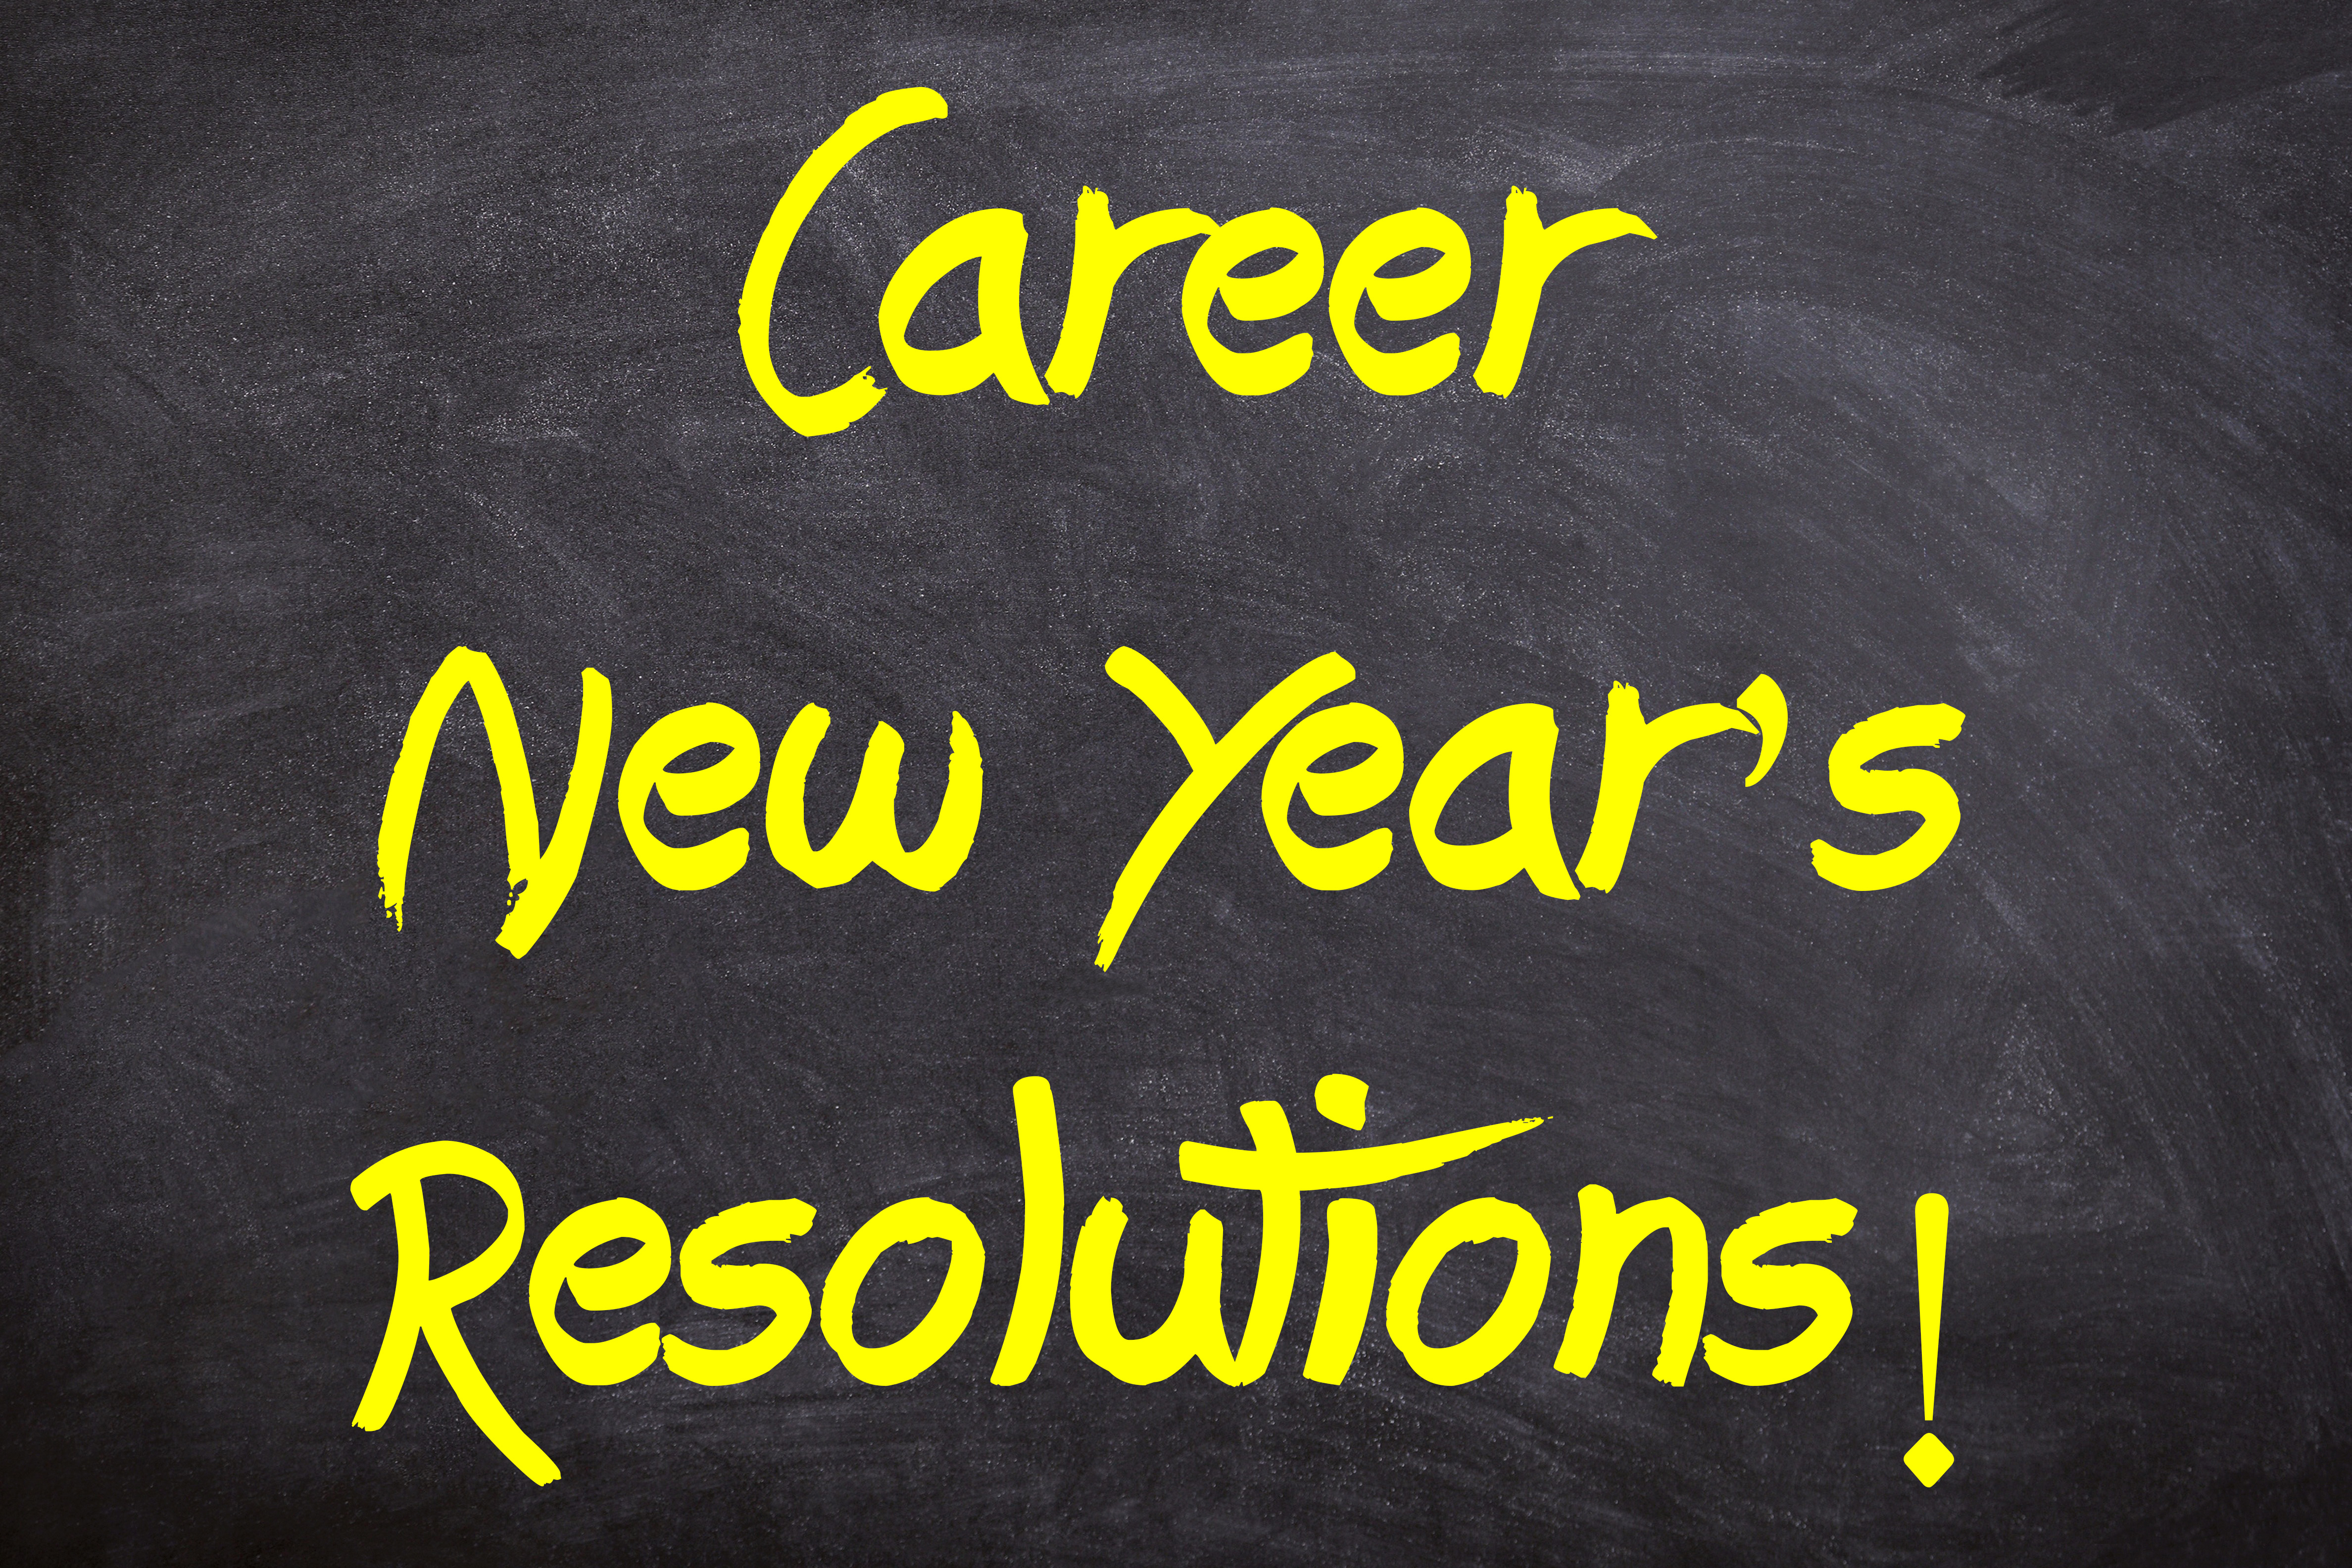 Career New Year's Resolutions